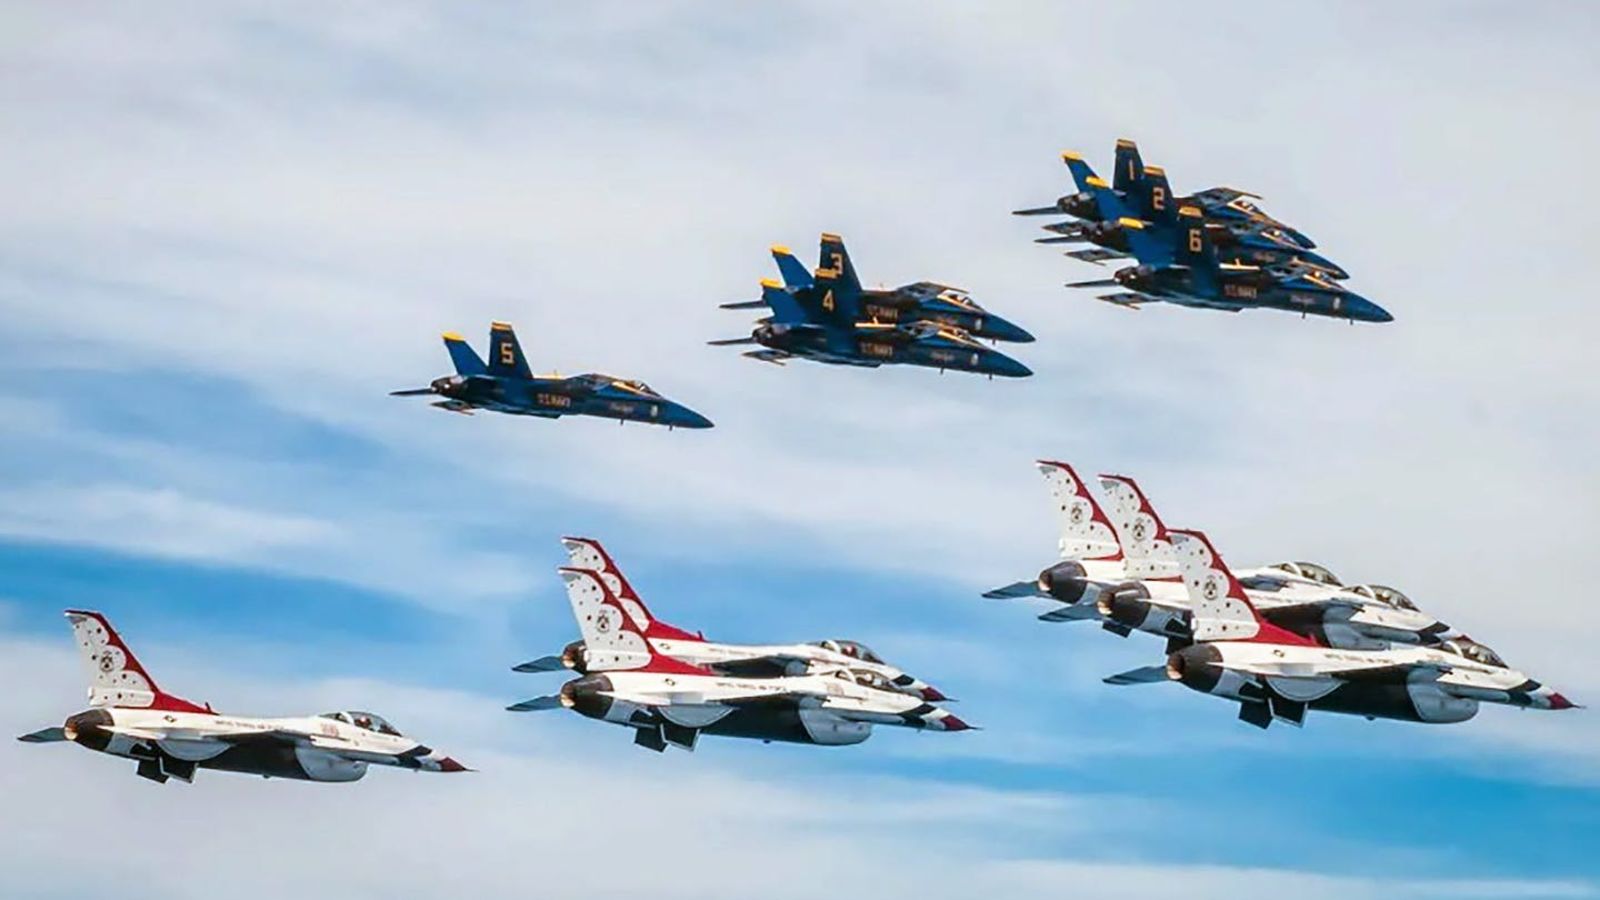 Illustration for article titled Combined Blue Angels/Thunderbirds Flights Today